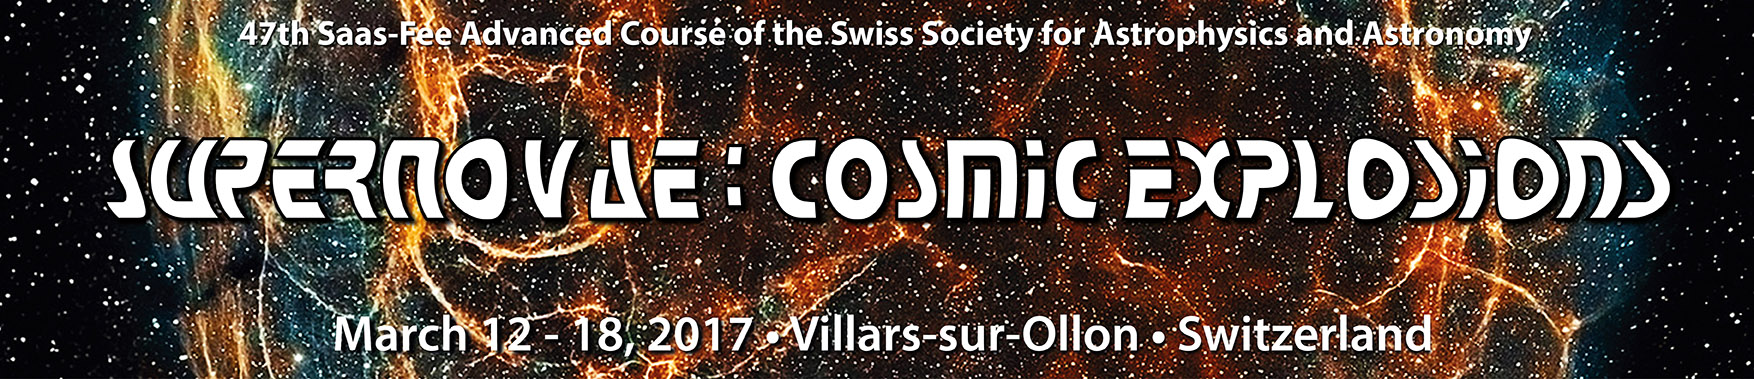 47th Saas-Fee advanced course: Supernovae, cosmic explosions